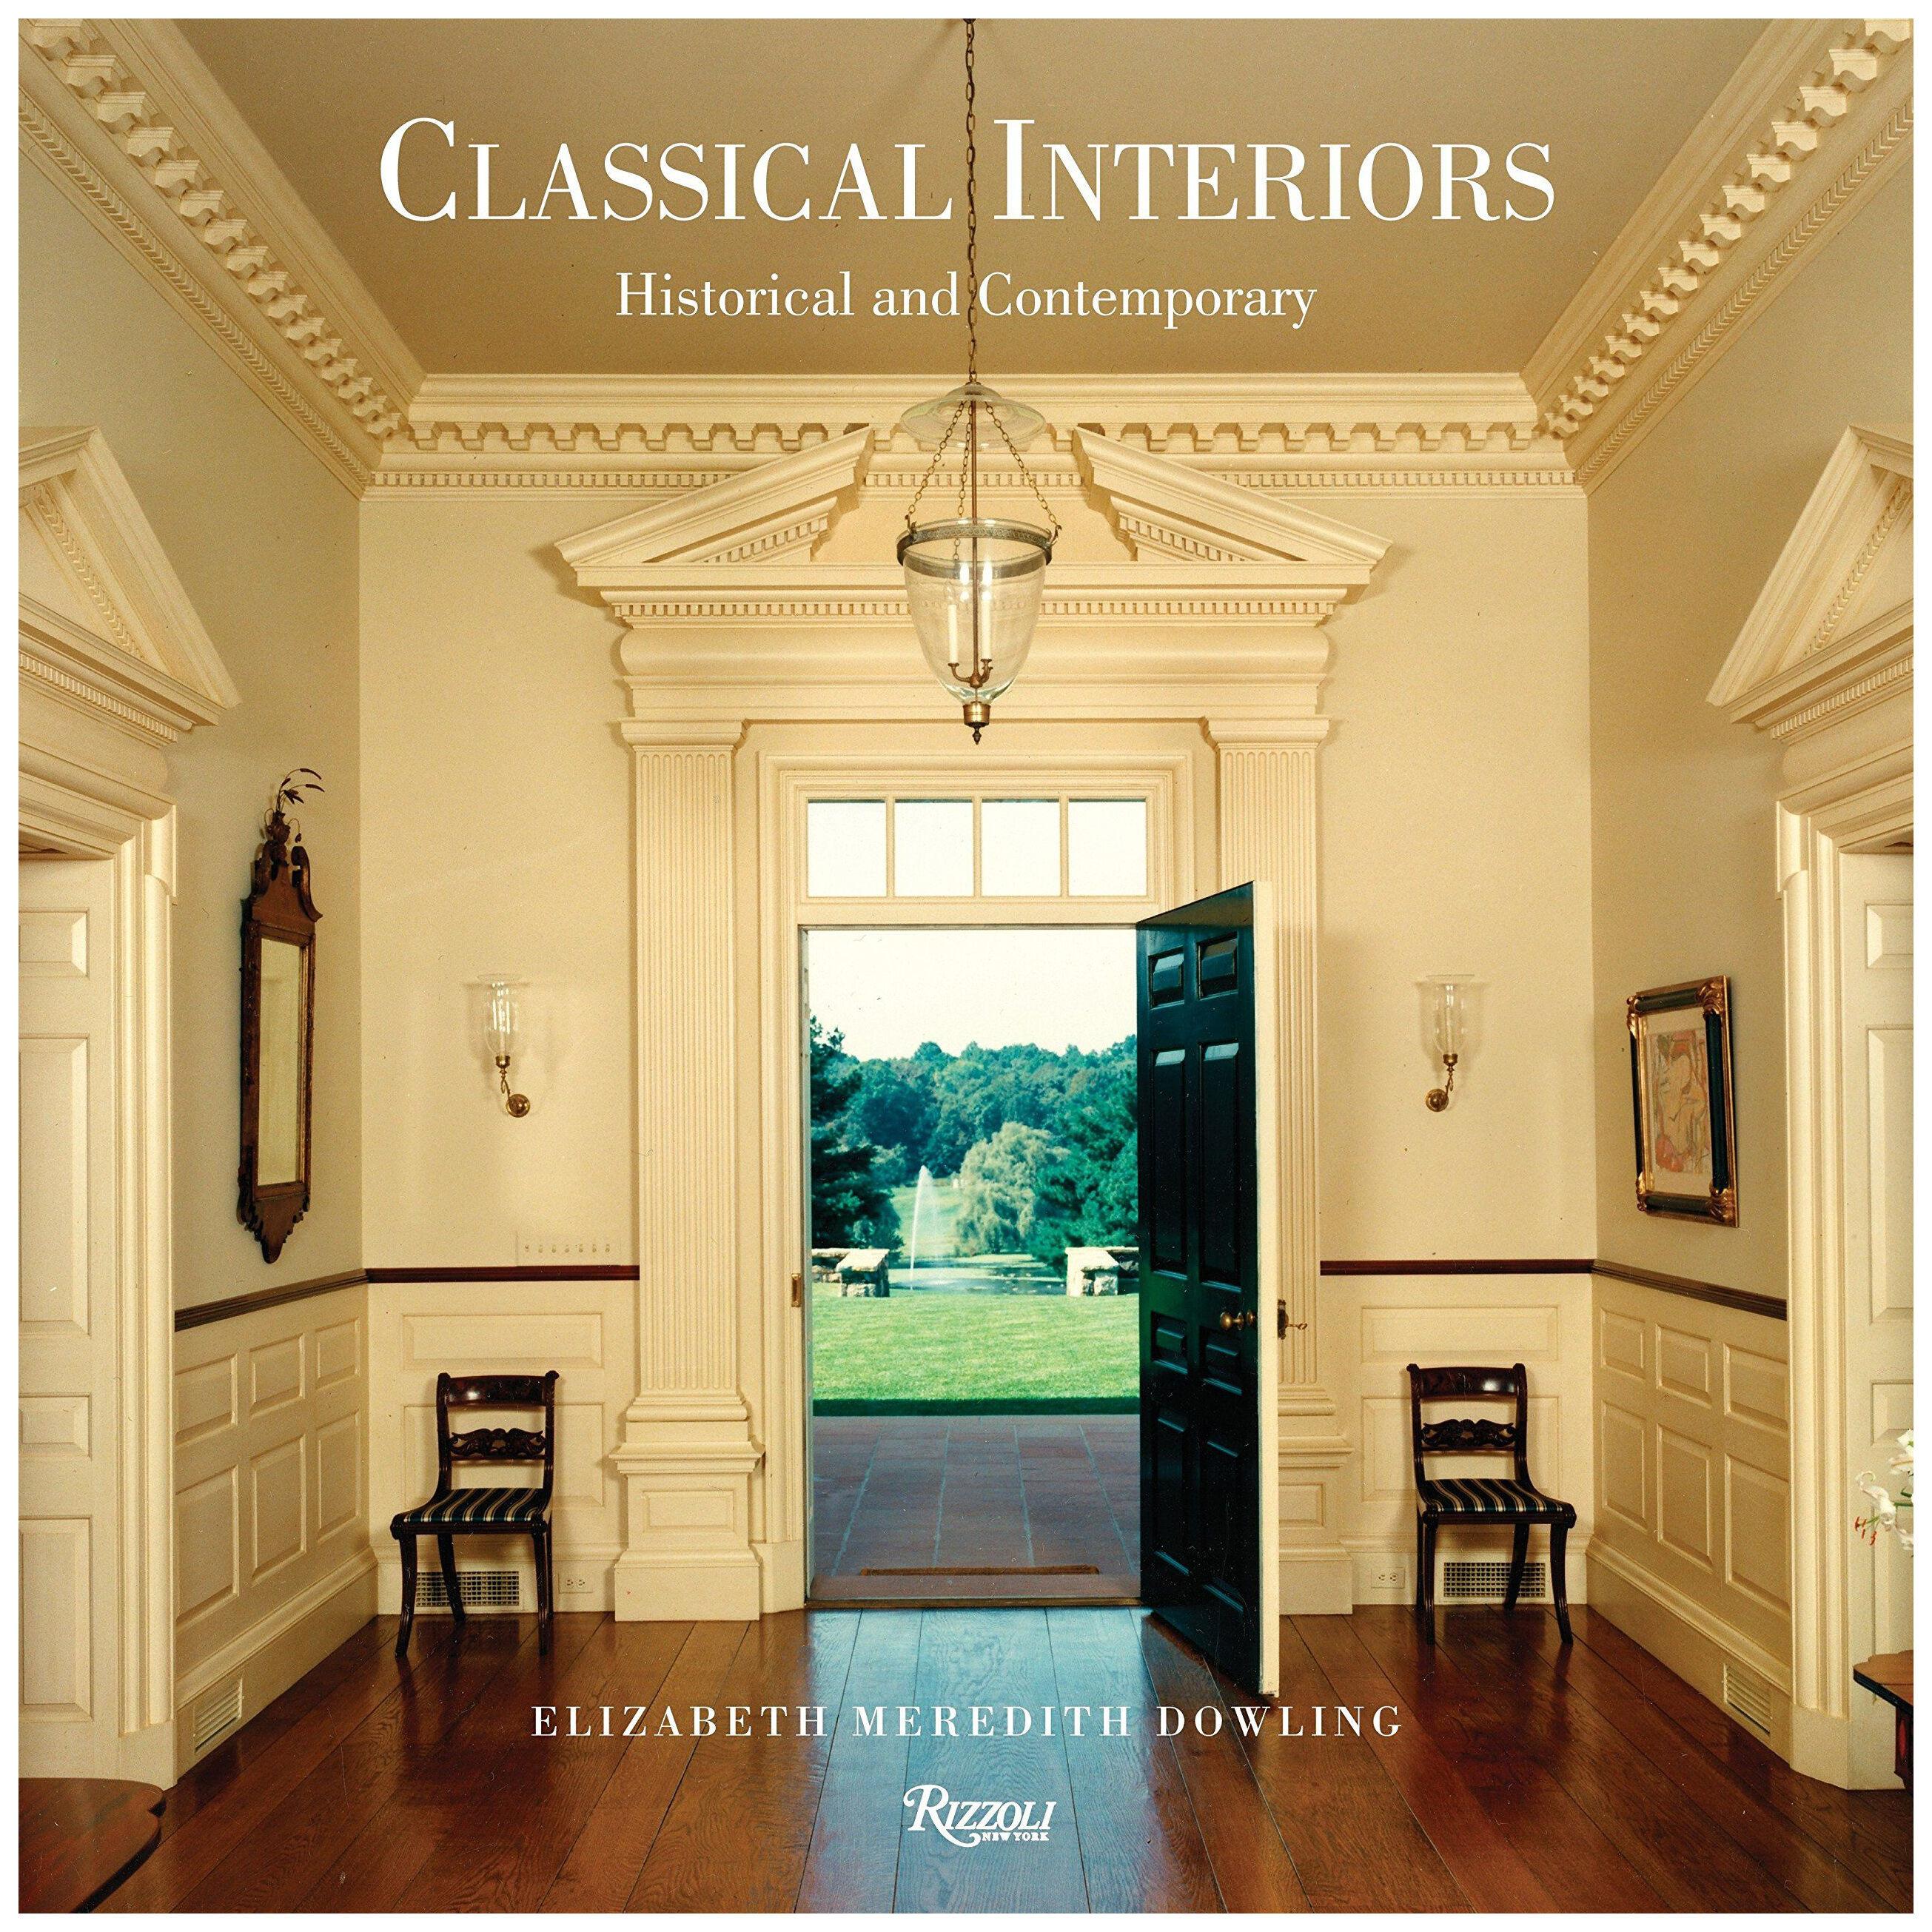 Classical Interiors: Historical and Contemporary (Book)